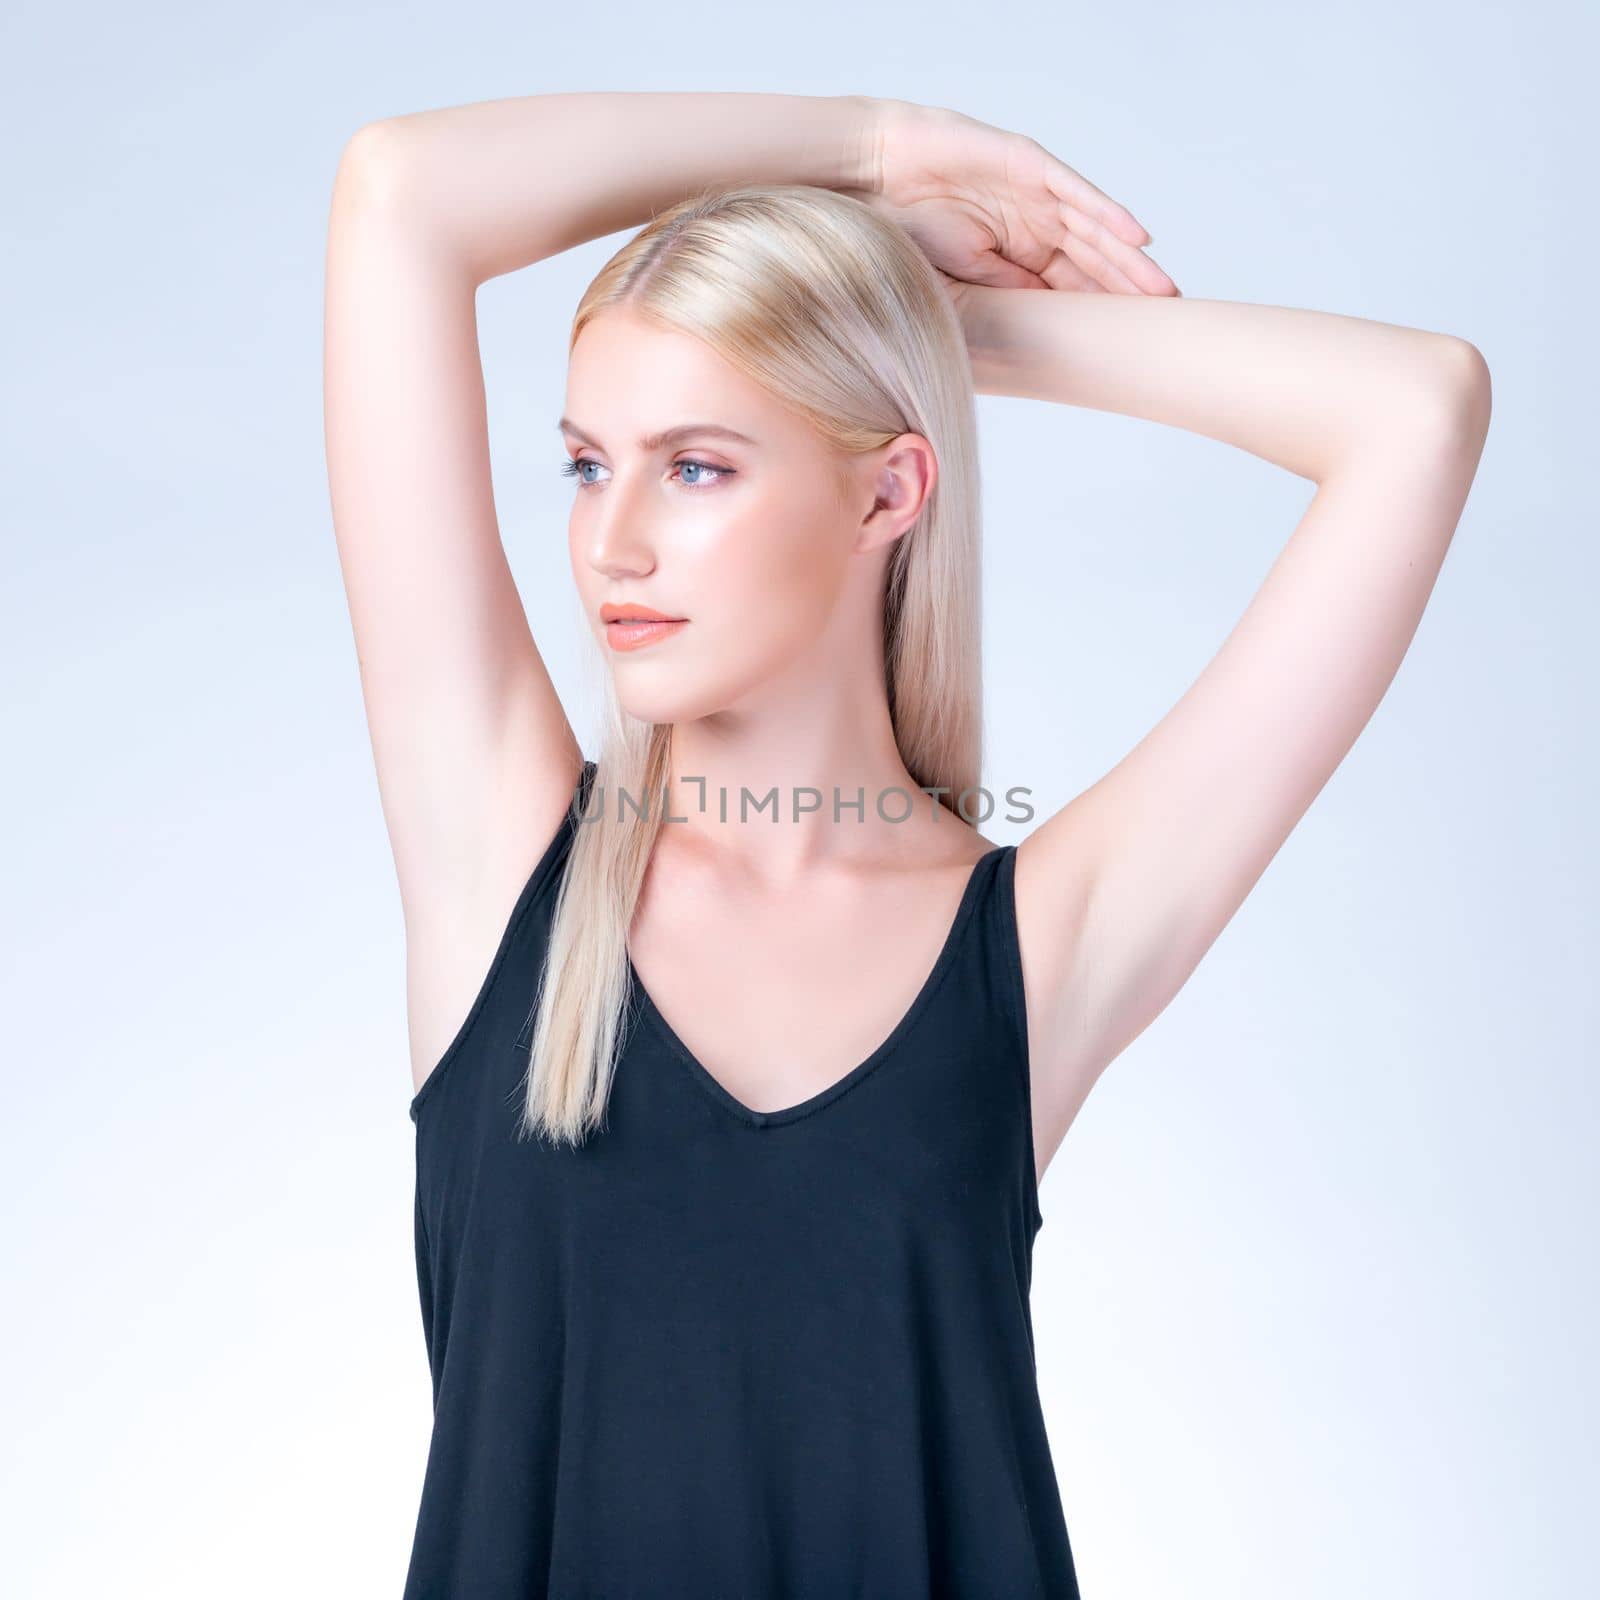 Personable woman lifting her armpit showing clean and hygiene underarm. by biancoblue